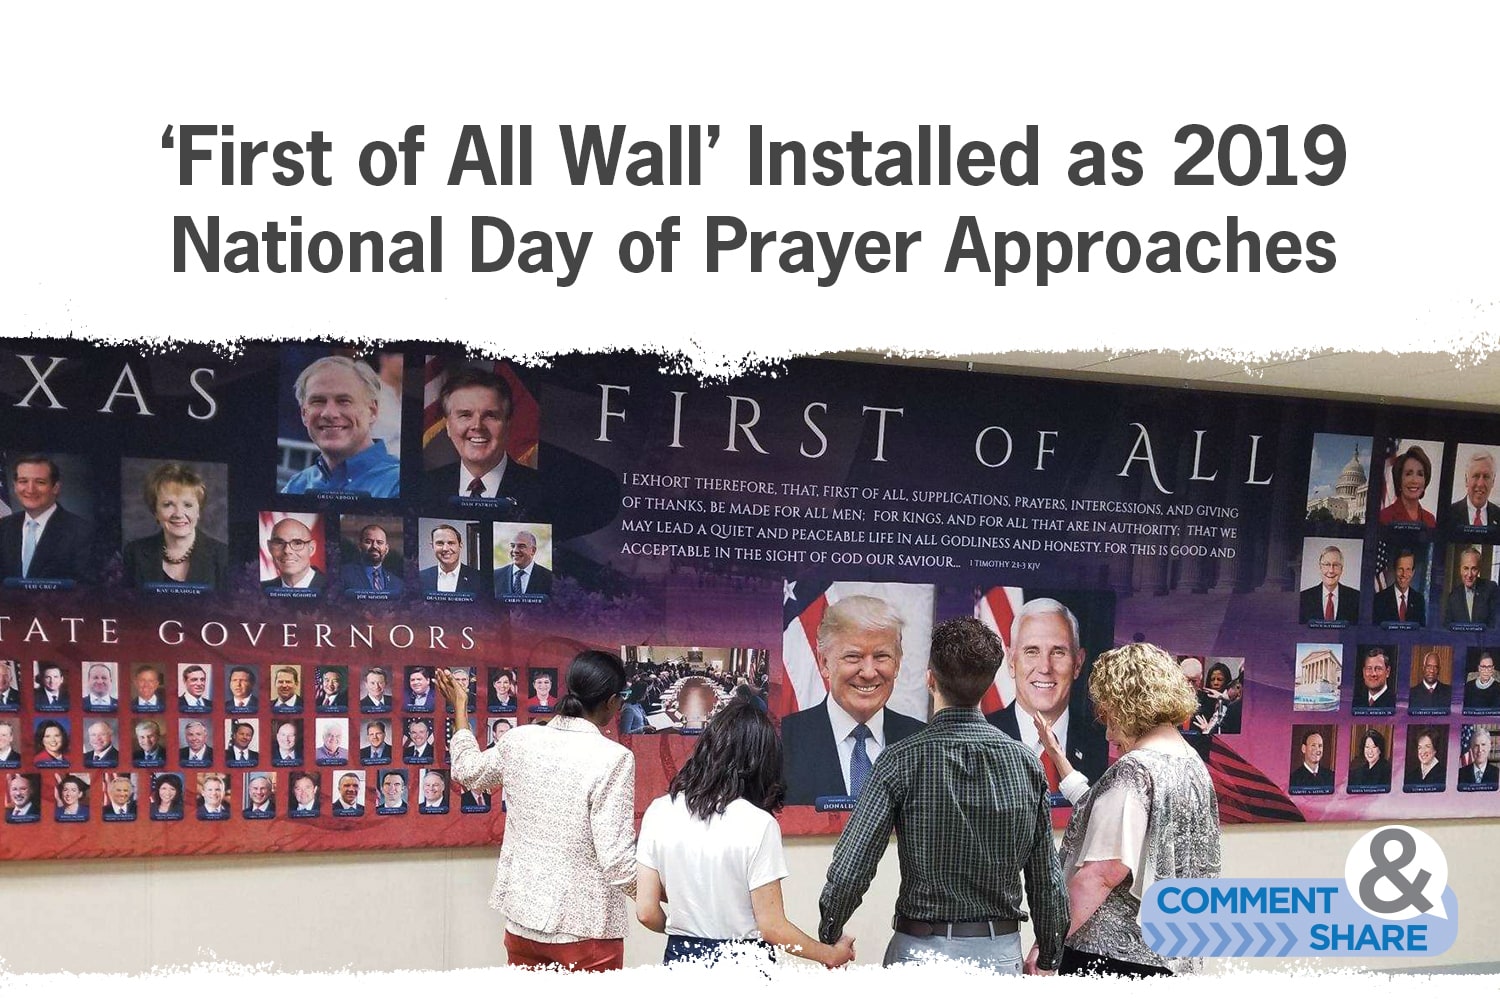 First of All Wall Installed as 2019 National Day of Prayer Approaches